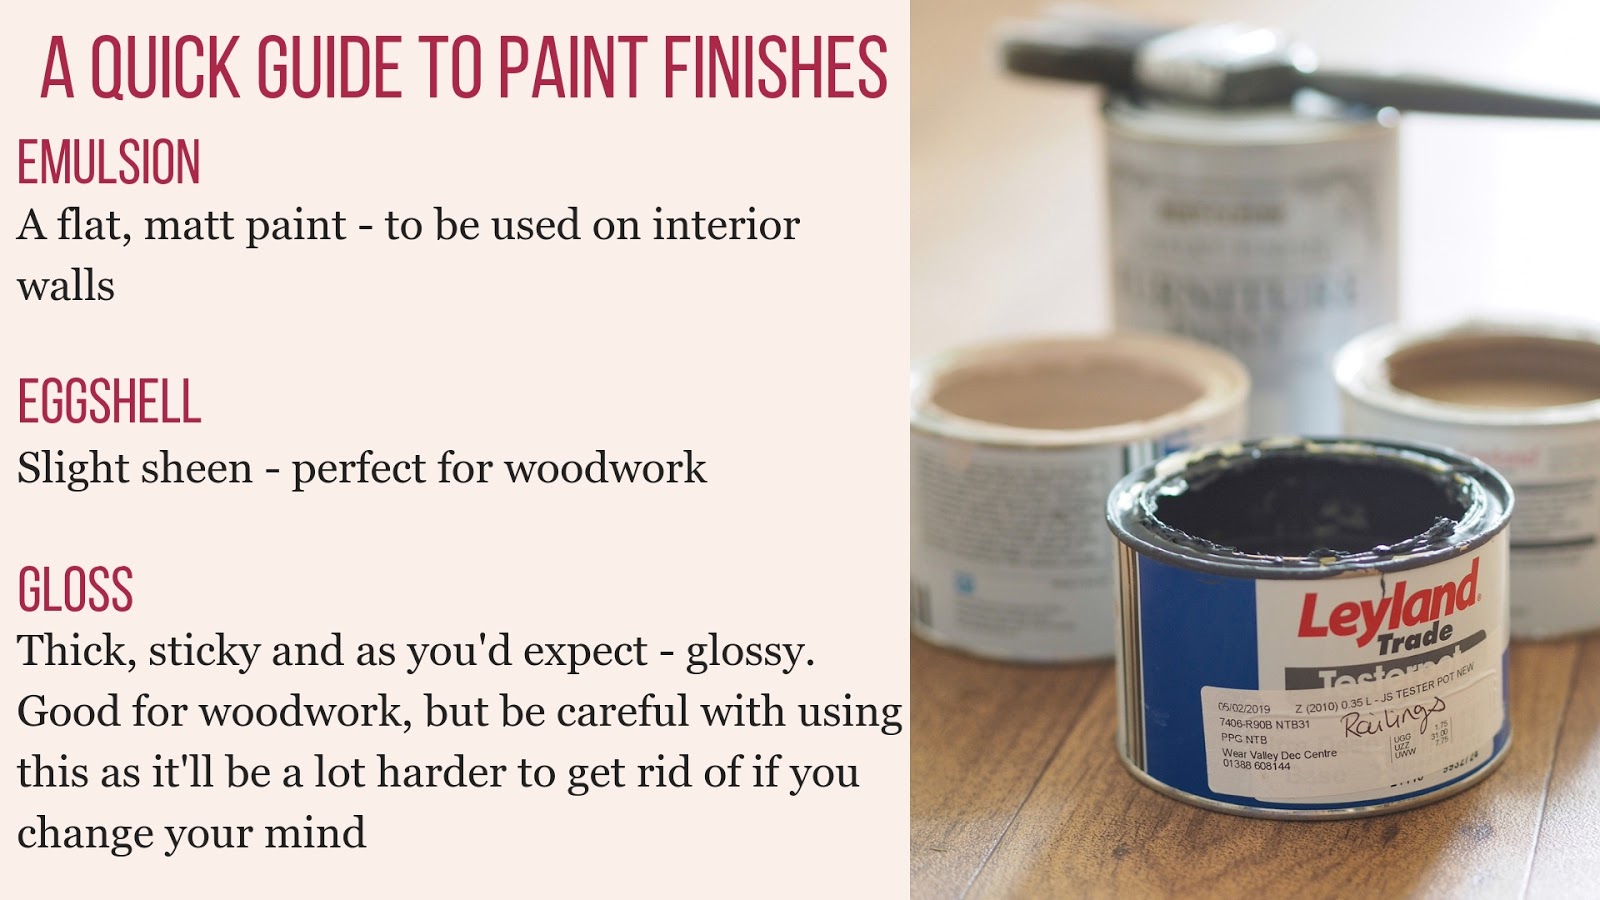 How to upcycle furniture using chalk paint and wax. Upcycling and DIY furniture makeover tips.